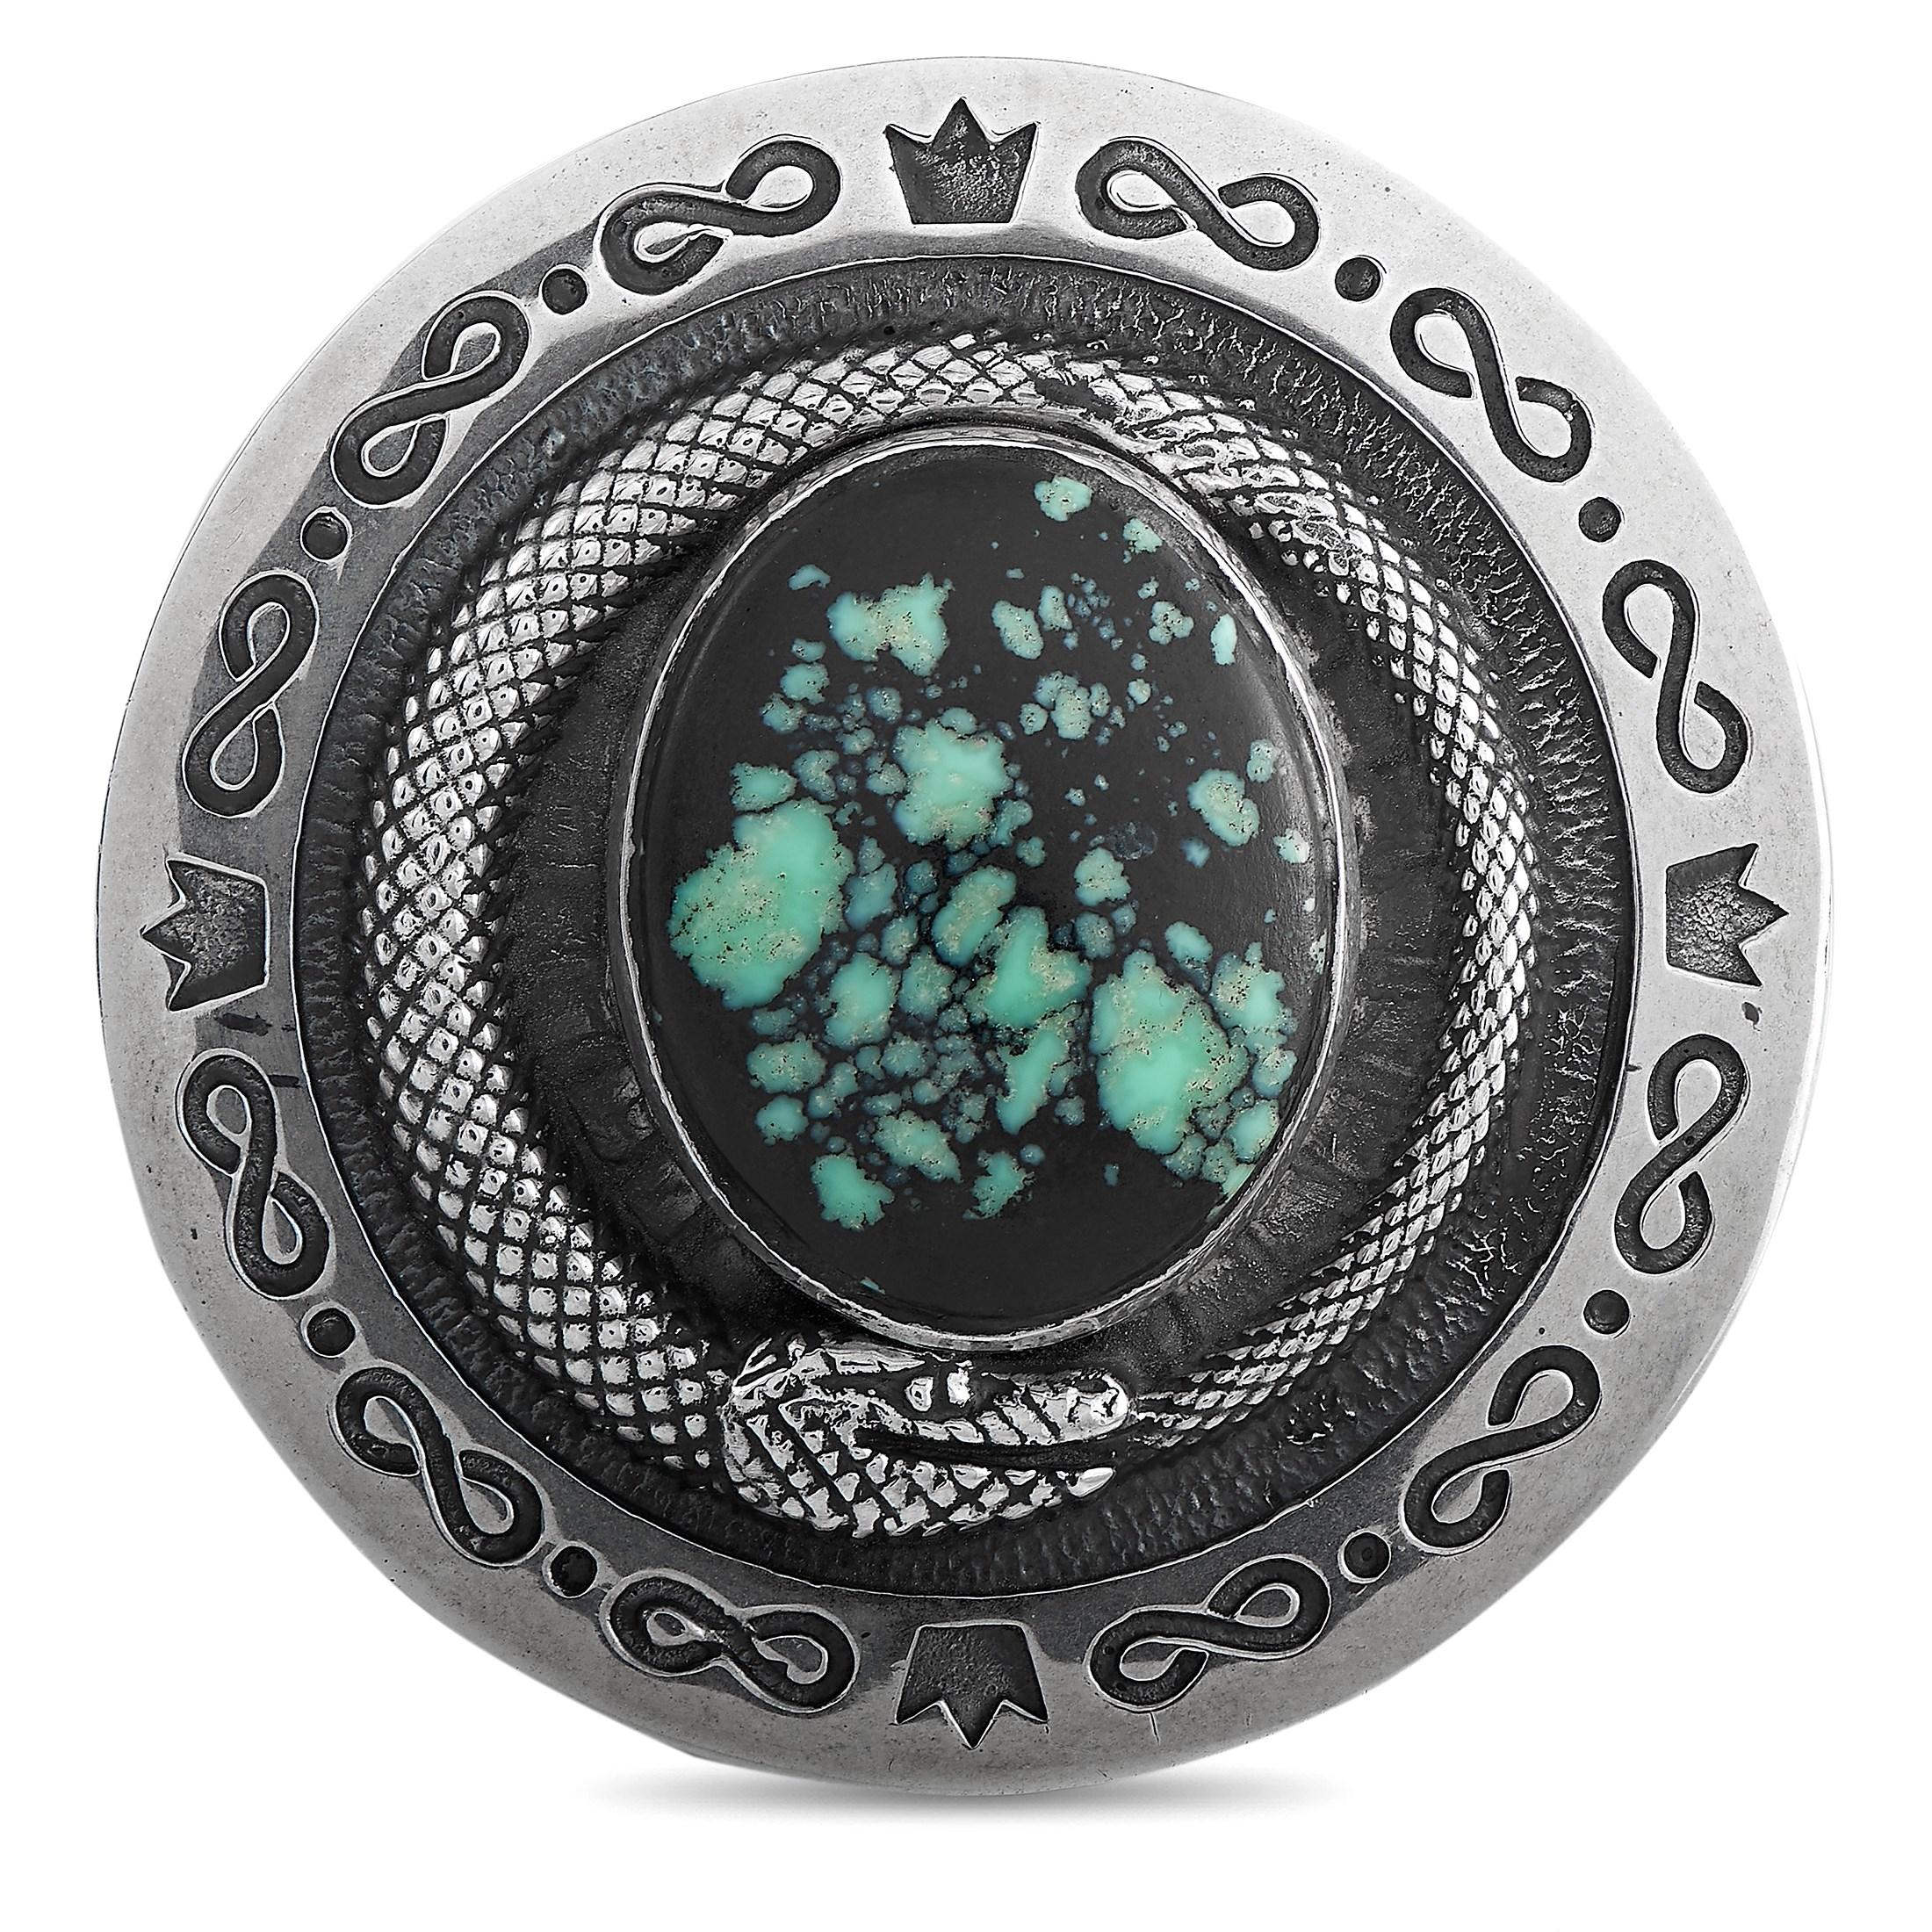 This King Baby stash box is made of bamboo wood and boasts a sterling silver lid that is set with turquoise and features a snake motif. The box measures 2.50” in diameter and 1” in height.

Offered in brand-new condition, this item includes the